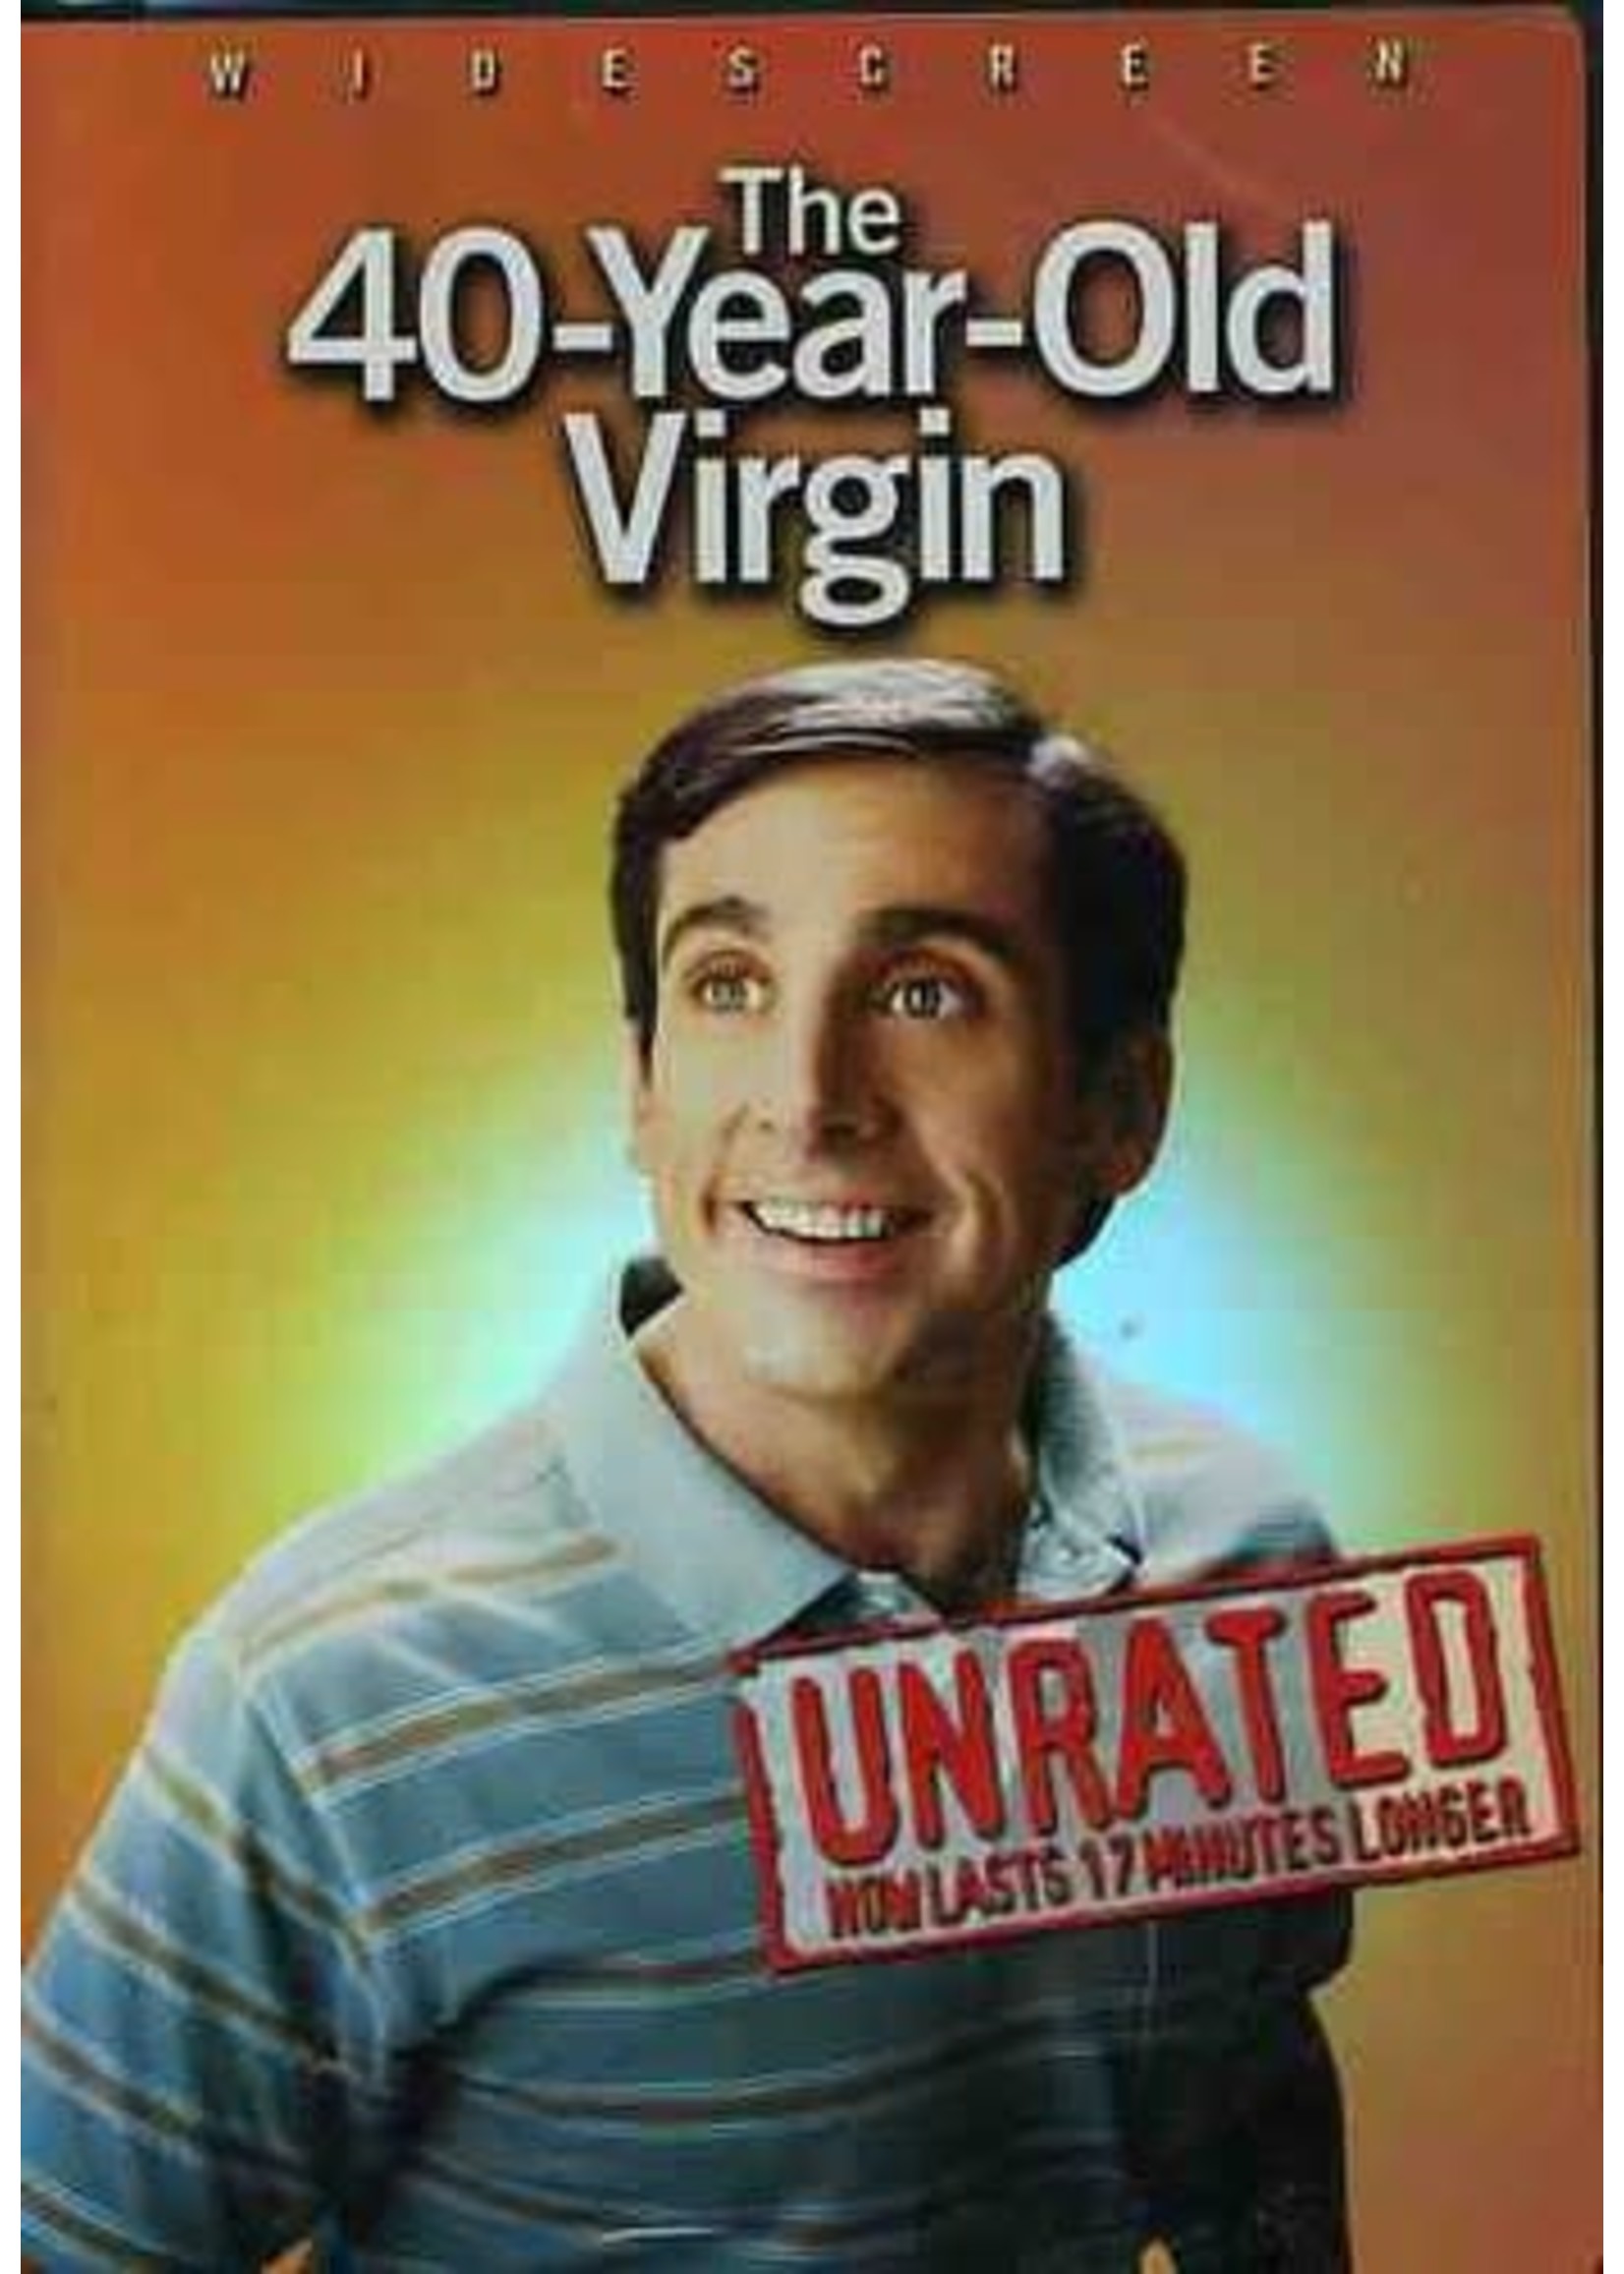 The 40 Year Old Virgin (Unrated) (Unrated) (DVD)